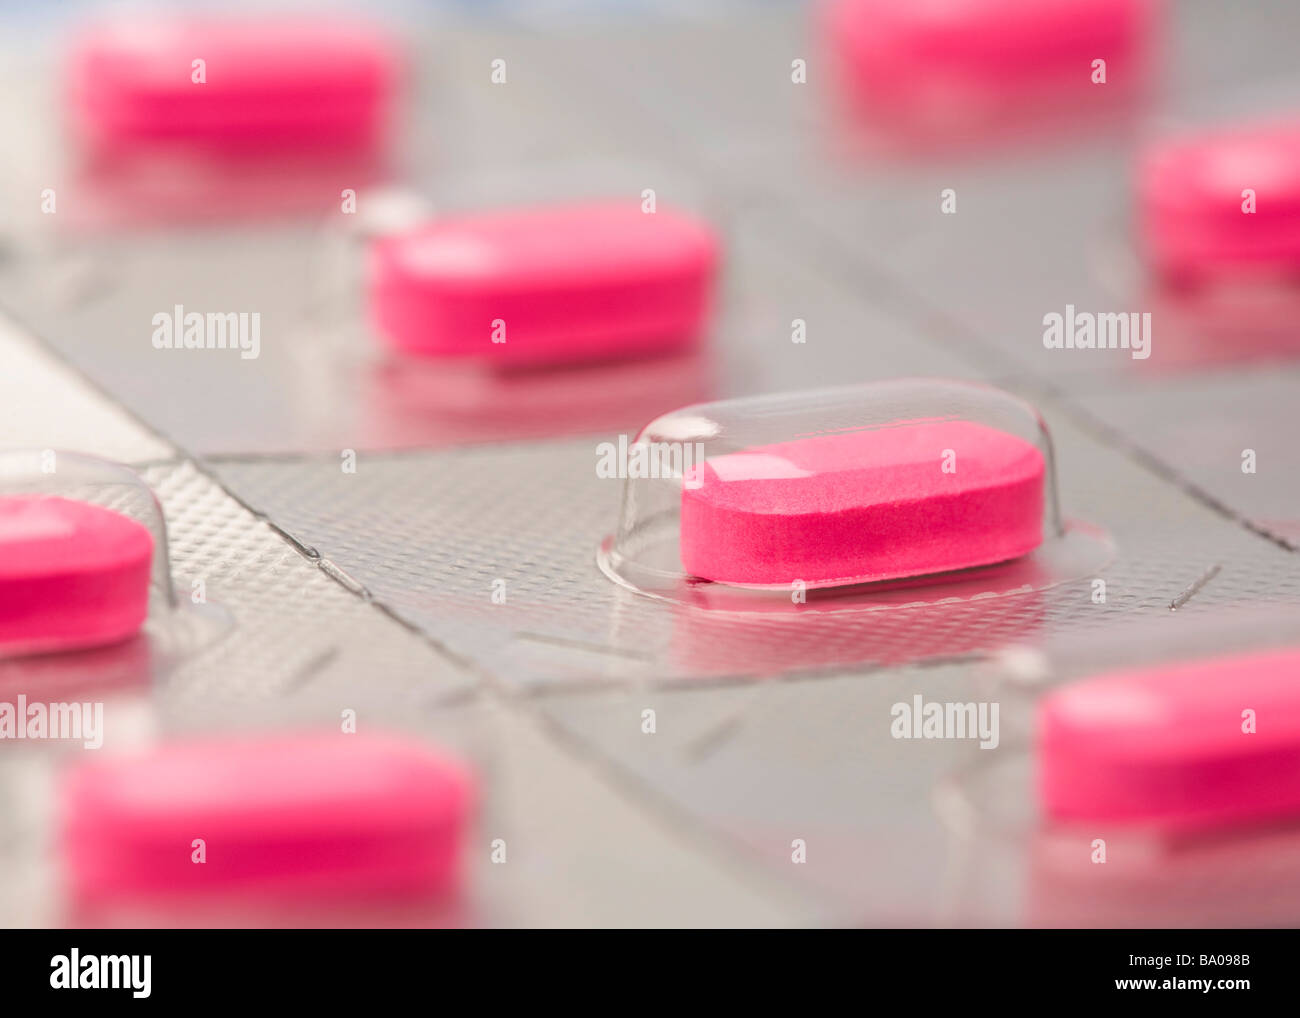 Individually wrapped pink medicine caplets Stock Photo